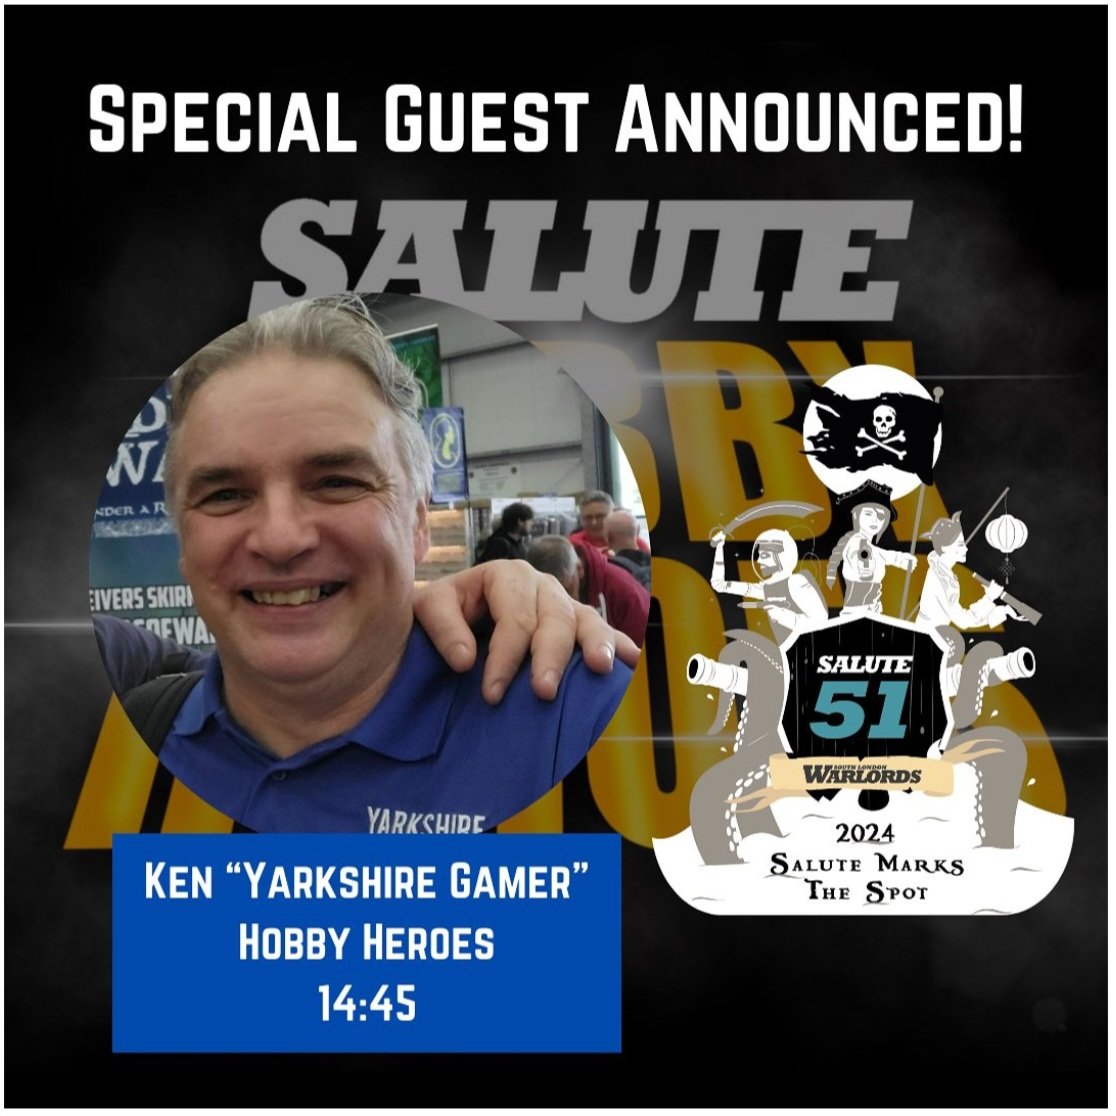 Standards are definitely slipping at the best show 'South of Sheffield' Yours truly will be waxing lyrical about something or other and releasing my new range of signed wet palettes 😁 #salute51 #wargaming #wargames #tabletopgames #tabletopgaming